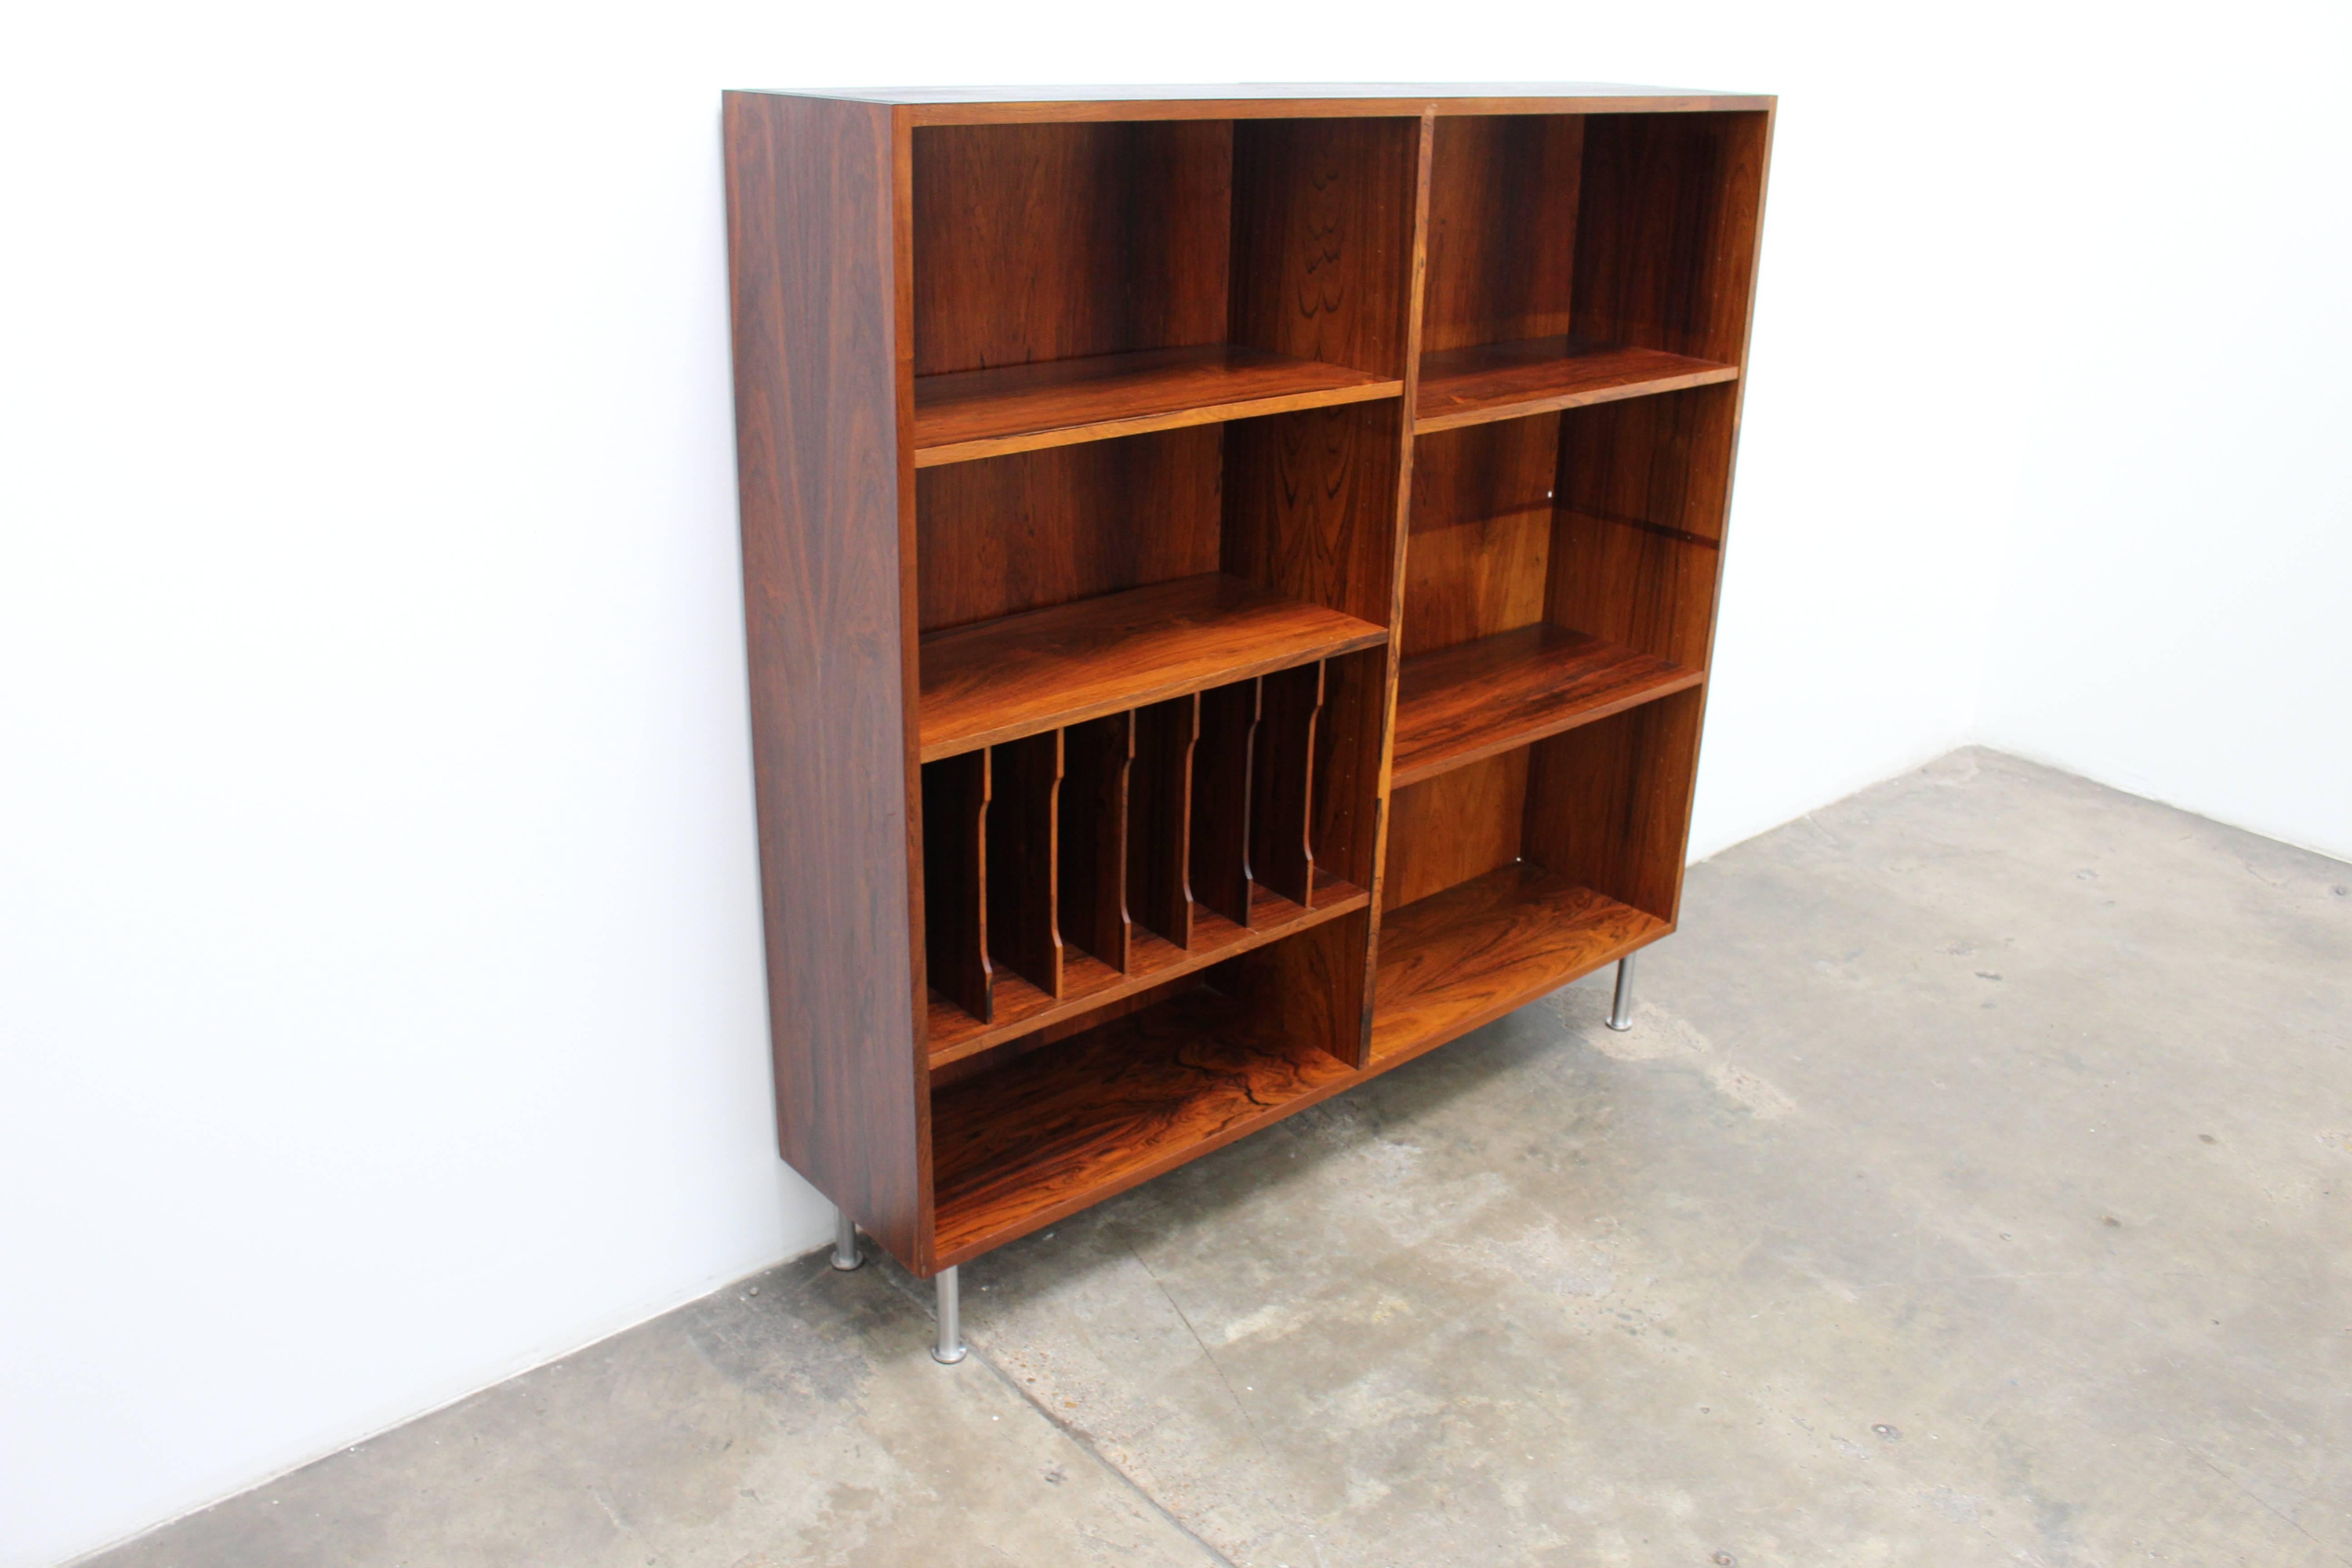 Gorgeous bookcase made of rosewood with metal legs. This bookshelf has fully adjustable shelves and is very versatile to fit your storage needs and personalize as you wish. The bookcase is in excellent shape with very minor fading for its age and is